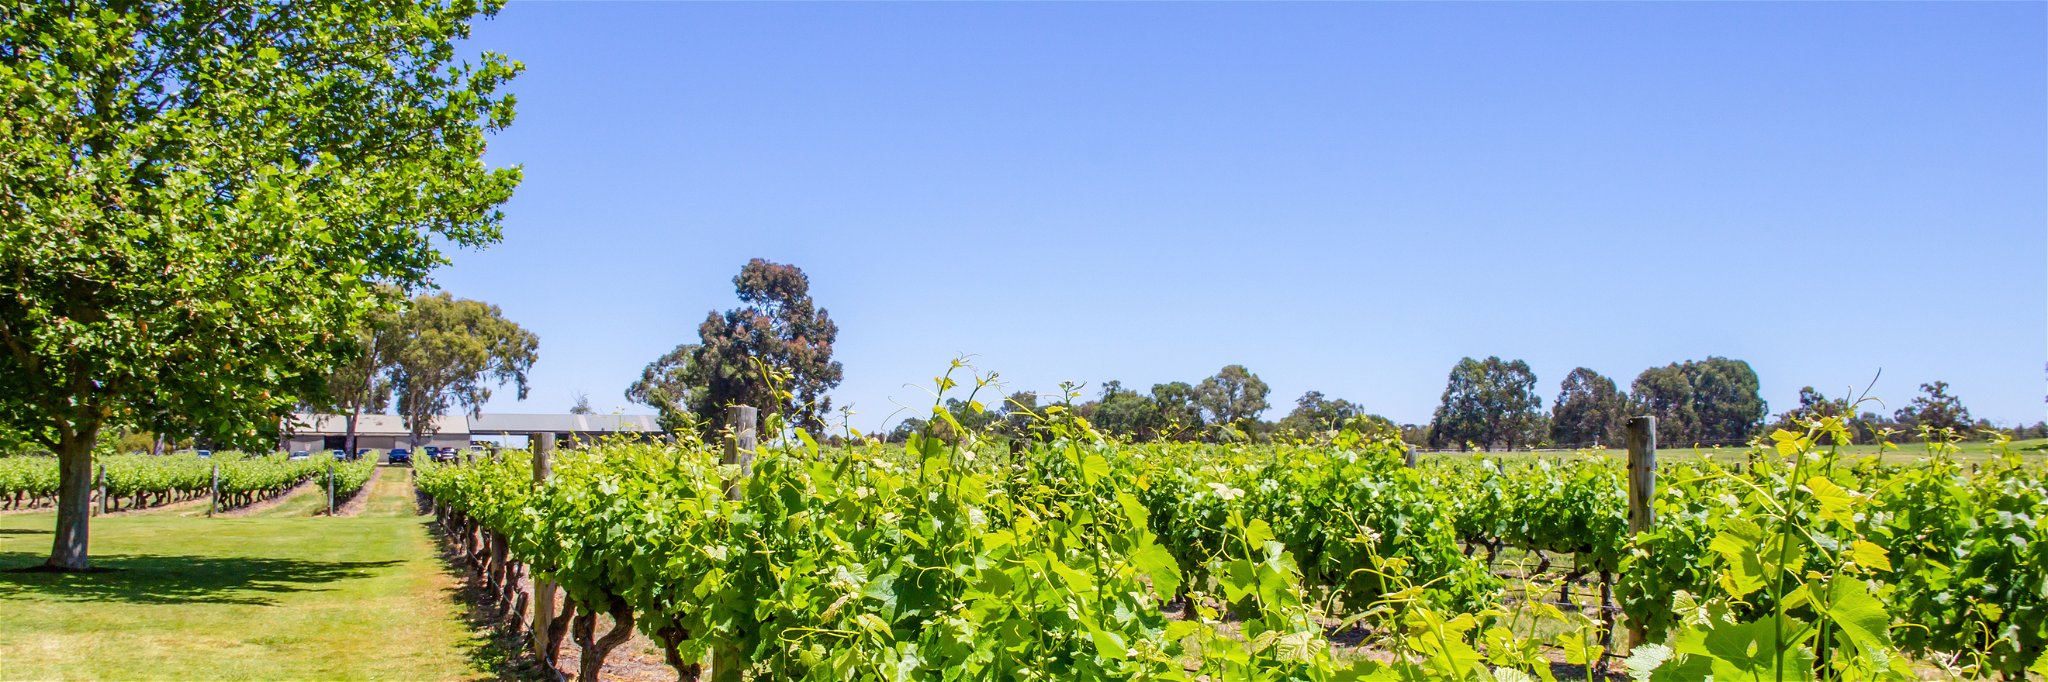 Margaret River vineyard in early summer day